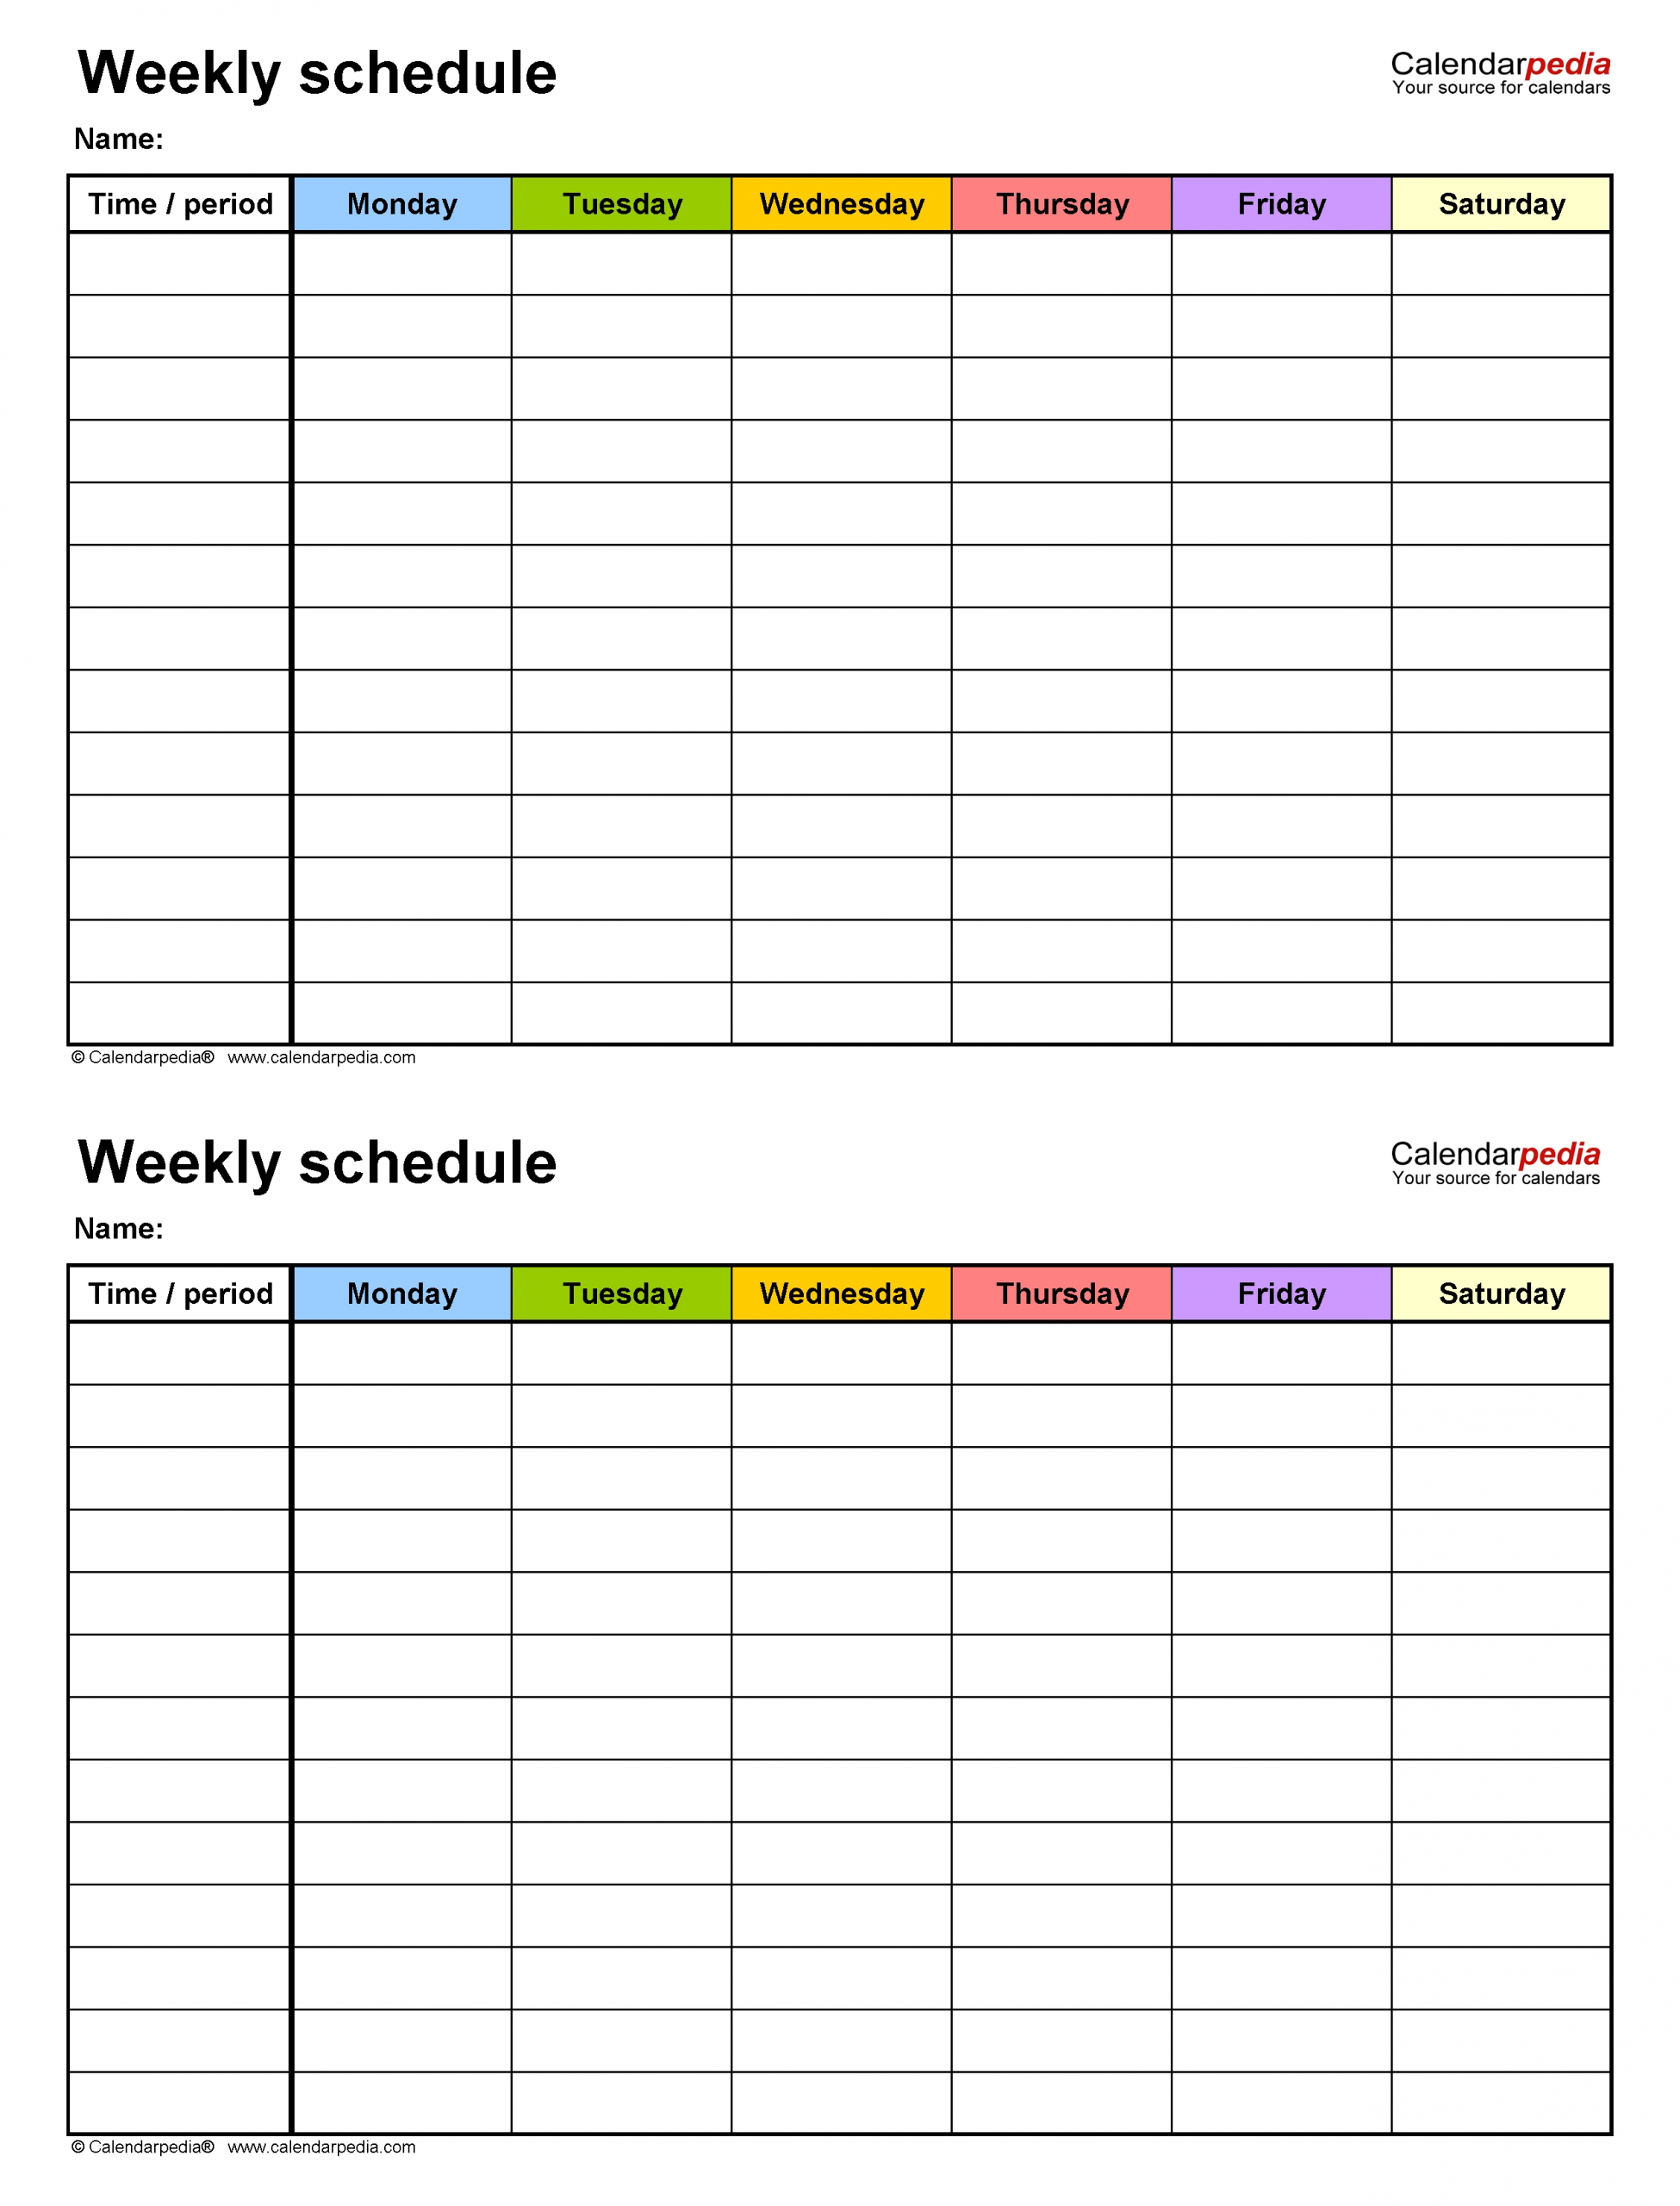 Pick Schedule For 4 People 6 Tasks Monday To Friday